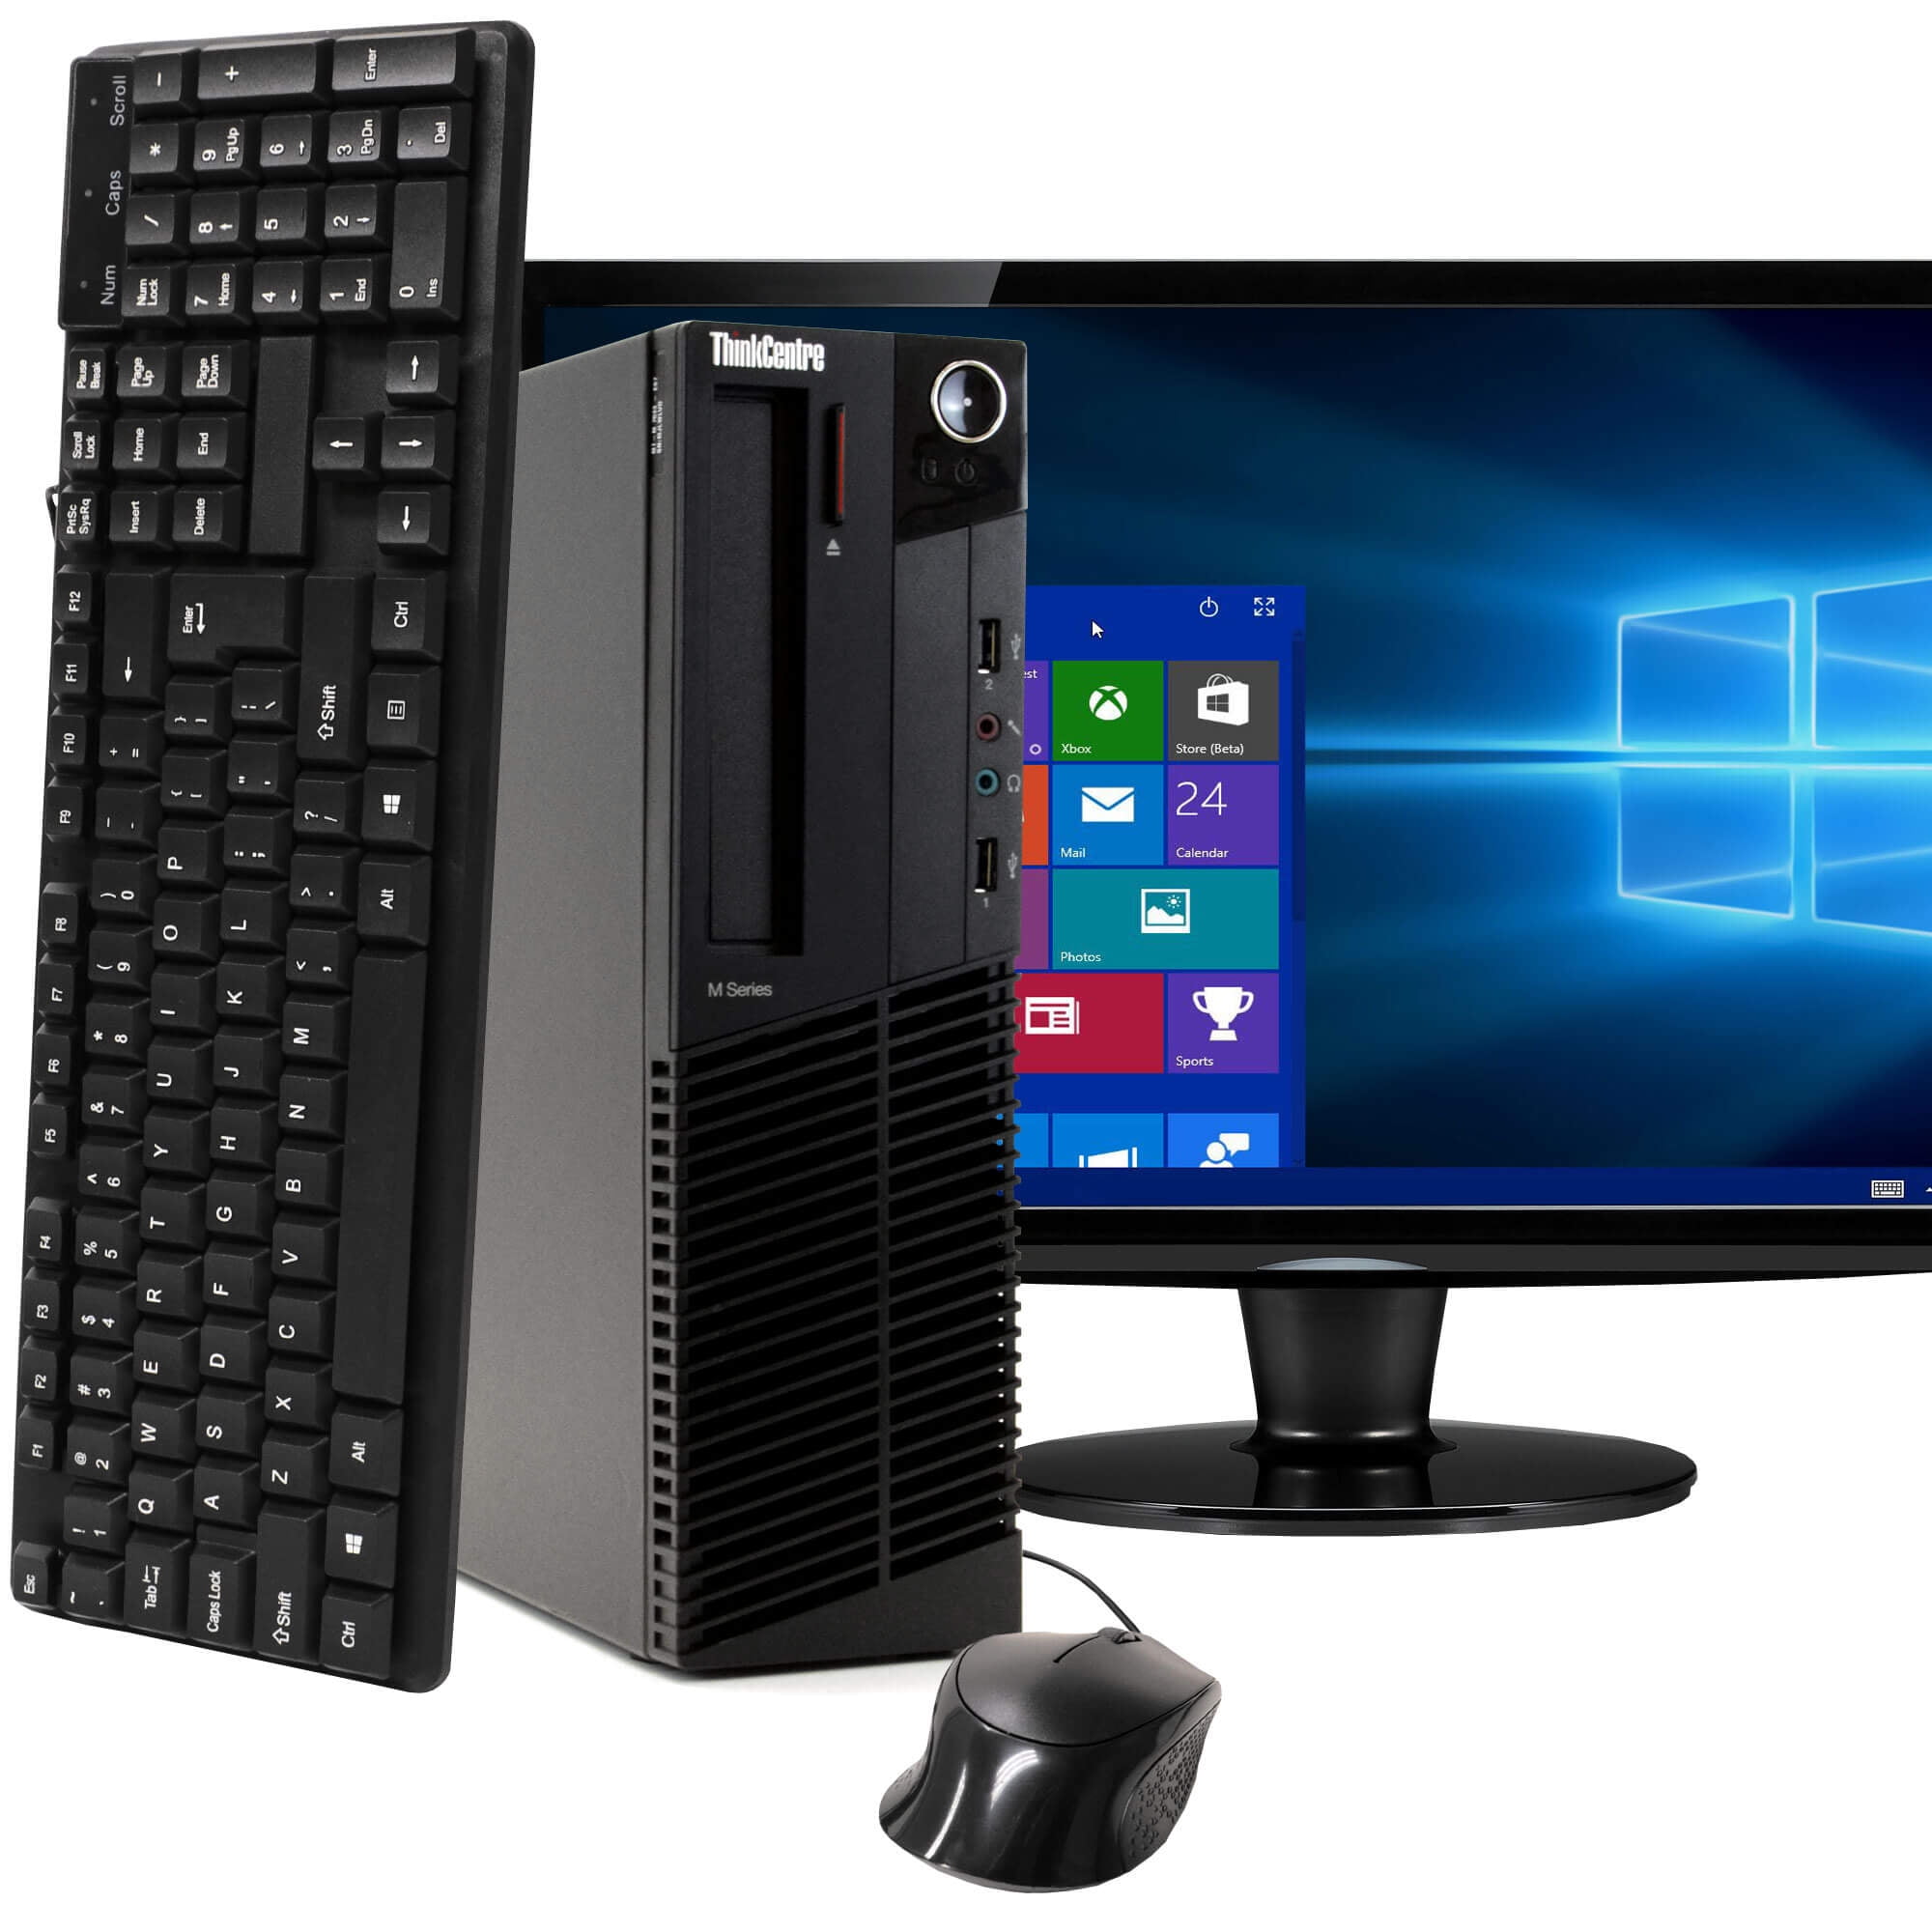 ik ontbijt Uitsluiting geweer IBM ThinkCentre M92P Desktop Computer PC, Intel Quad-Core i5, 250GB HDD,  8GB DDR3 RAM, Windows 10 Home, DVD, WIFI, 22in Monitor, USB Keyboard and  Mouse (Used - Like New) - Walmart.com